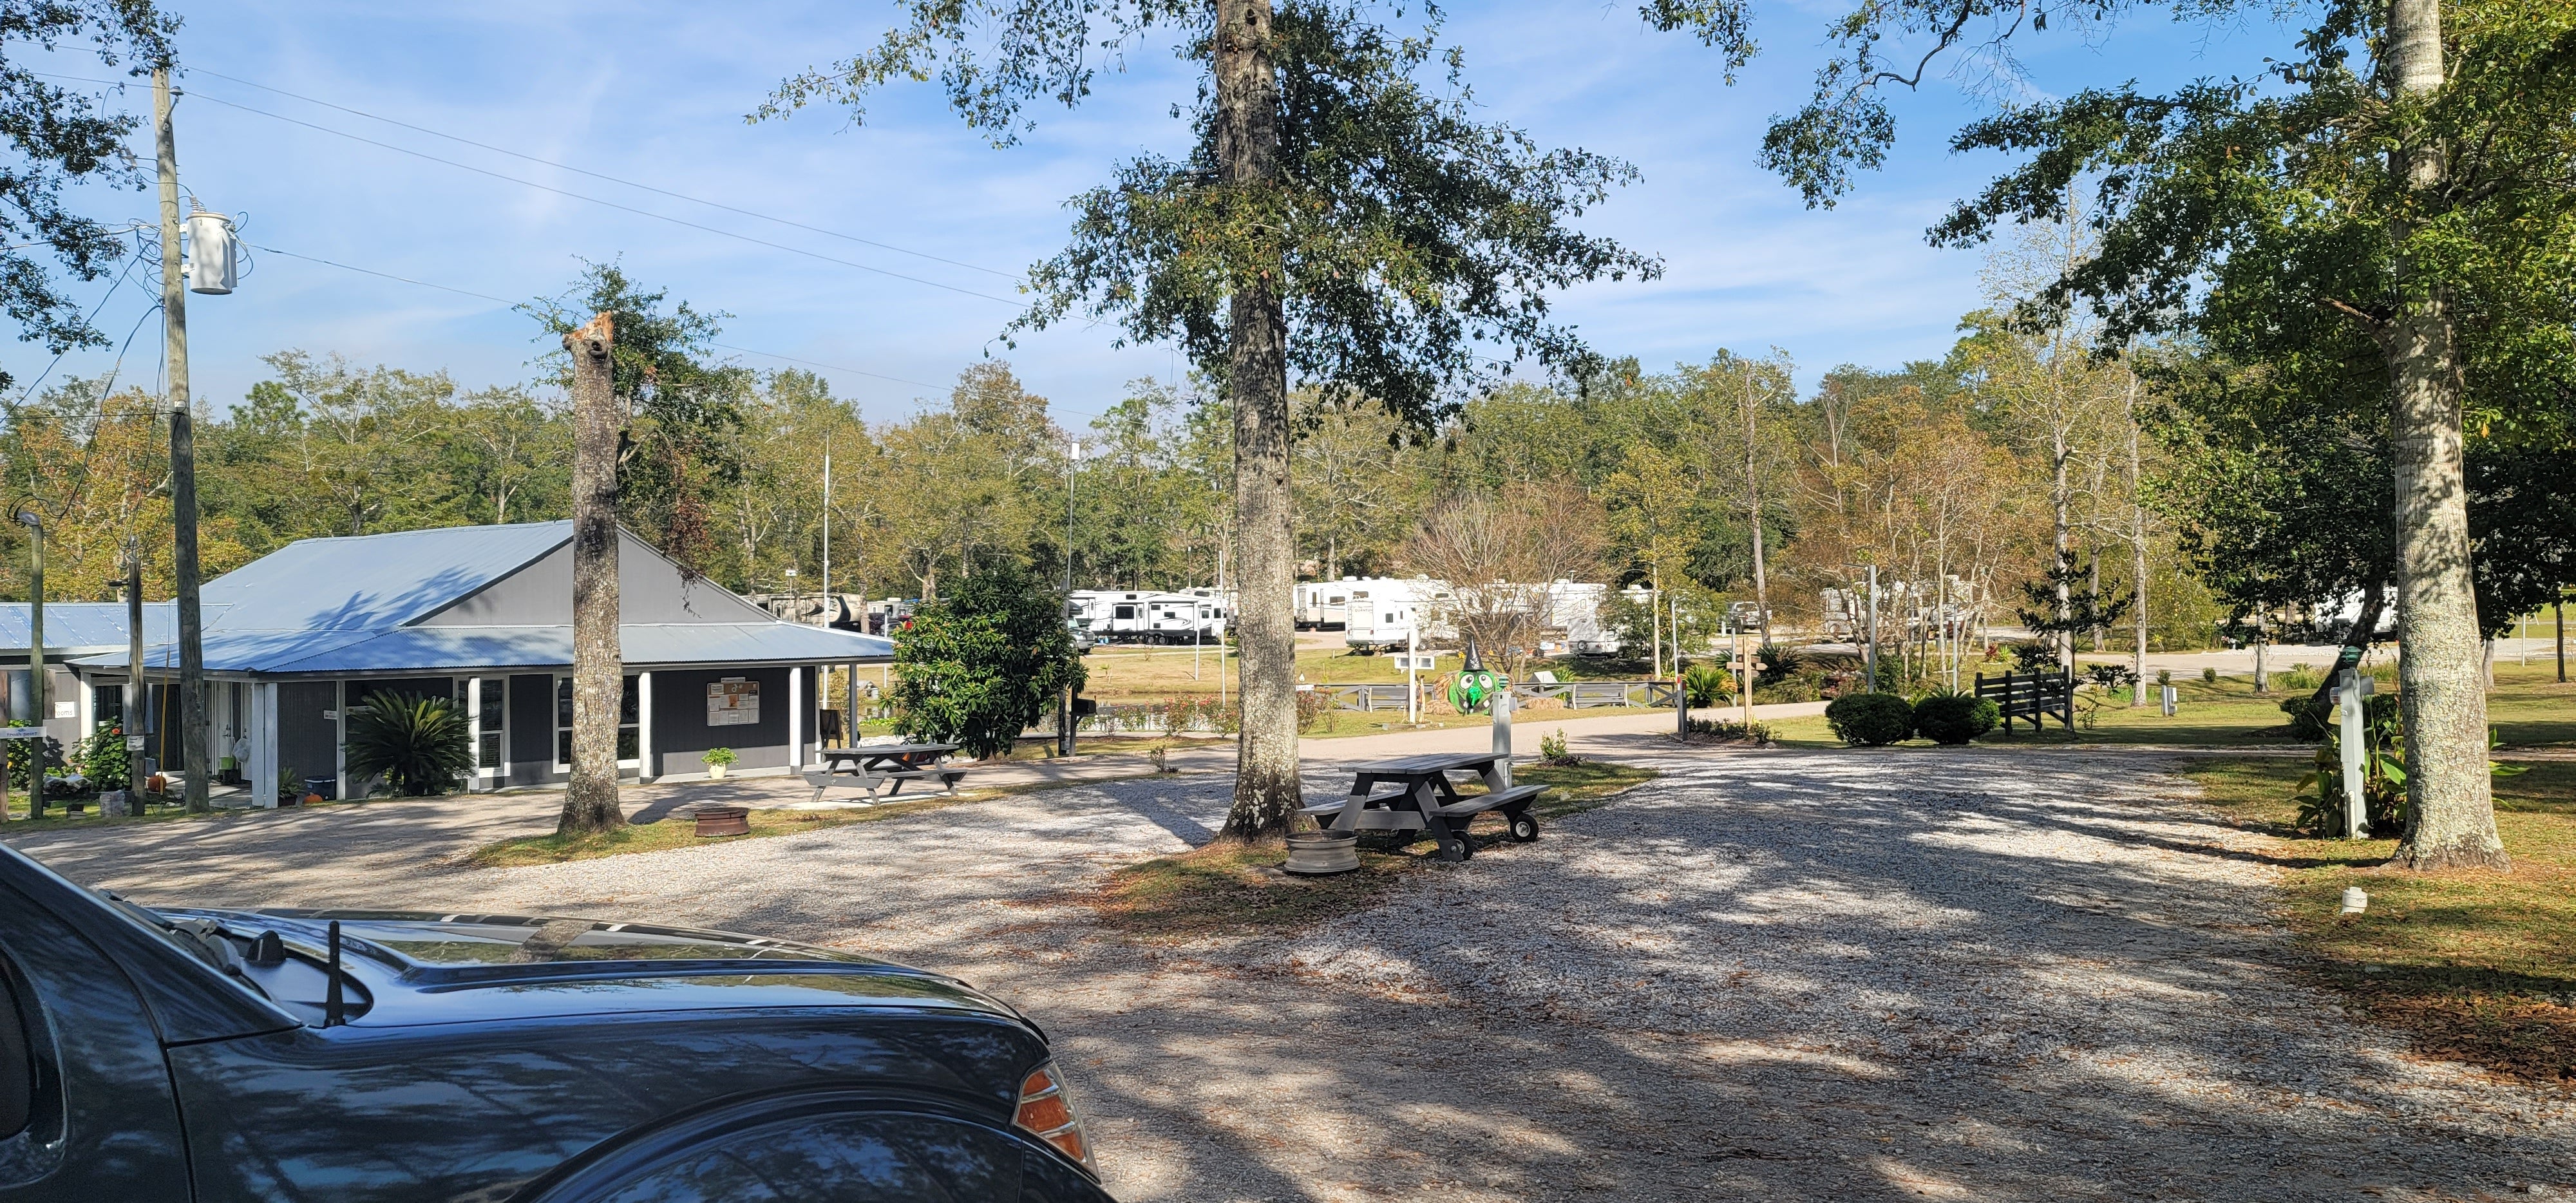 Camper submitted image from Outback Springs RV Resort - 3